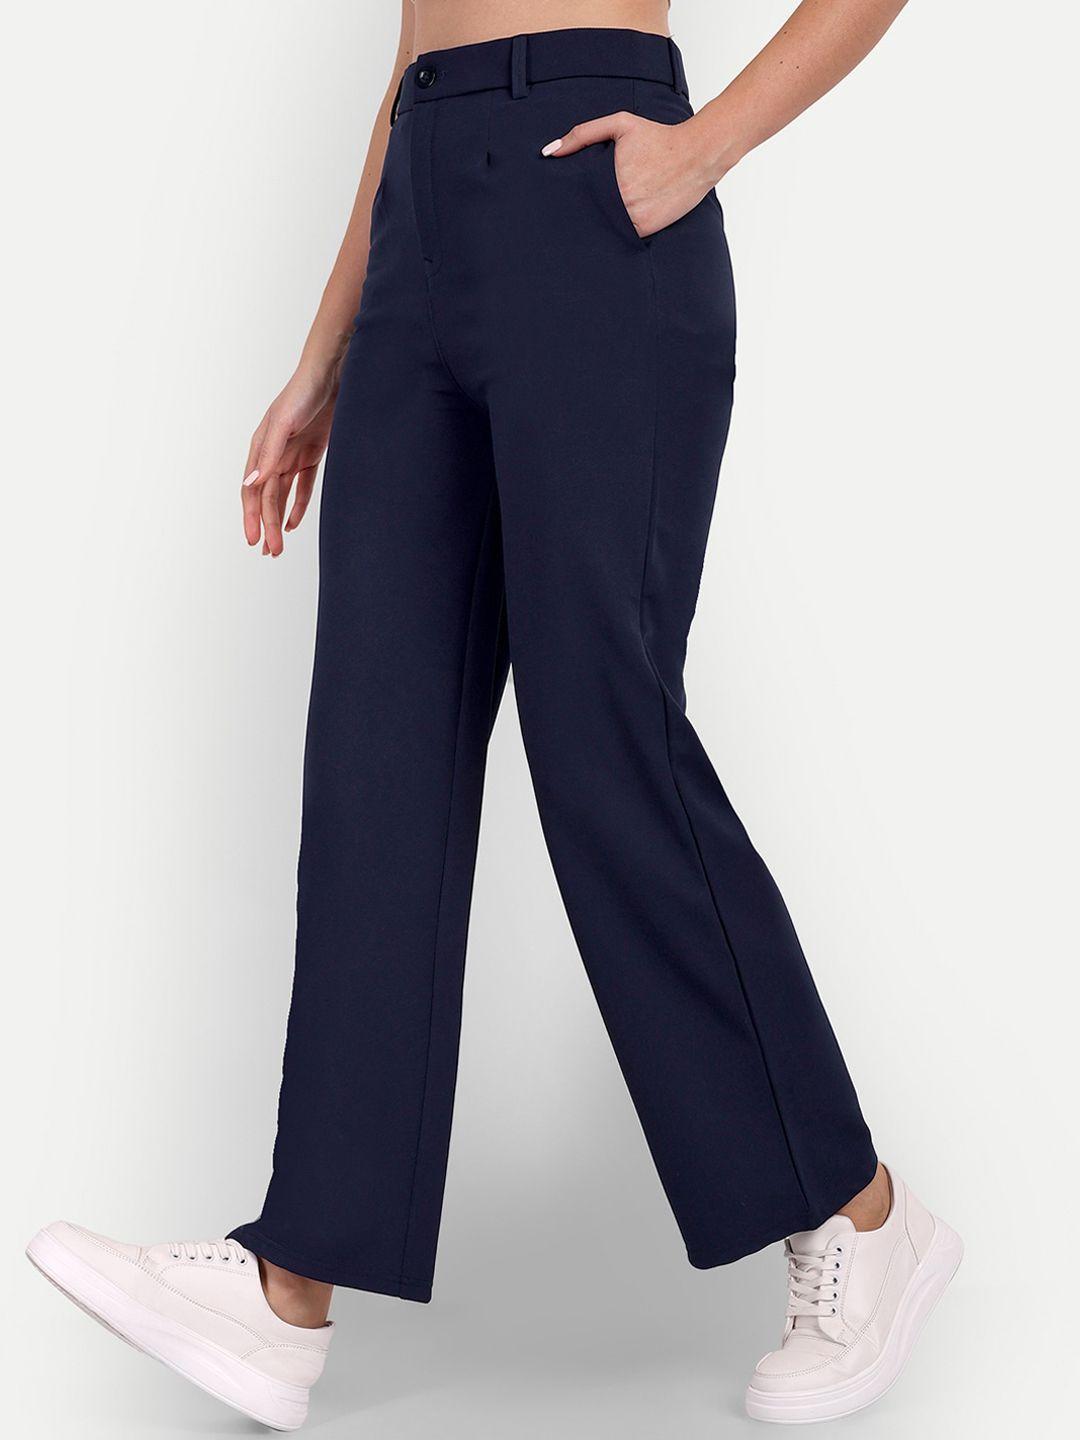 broadstar-women-high-rise-tailored-parallel-trousers